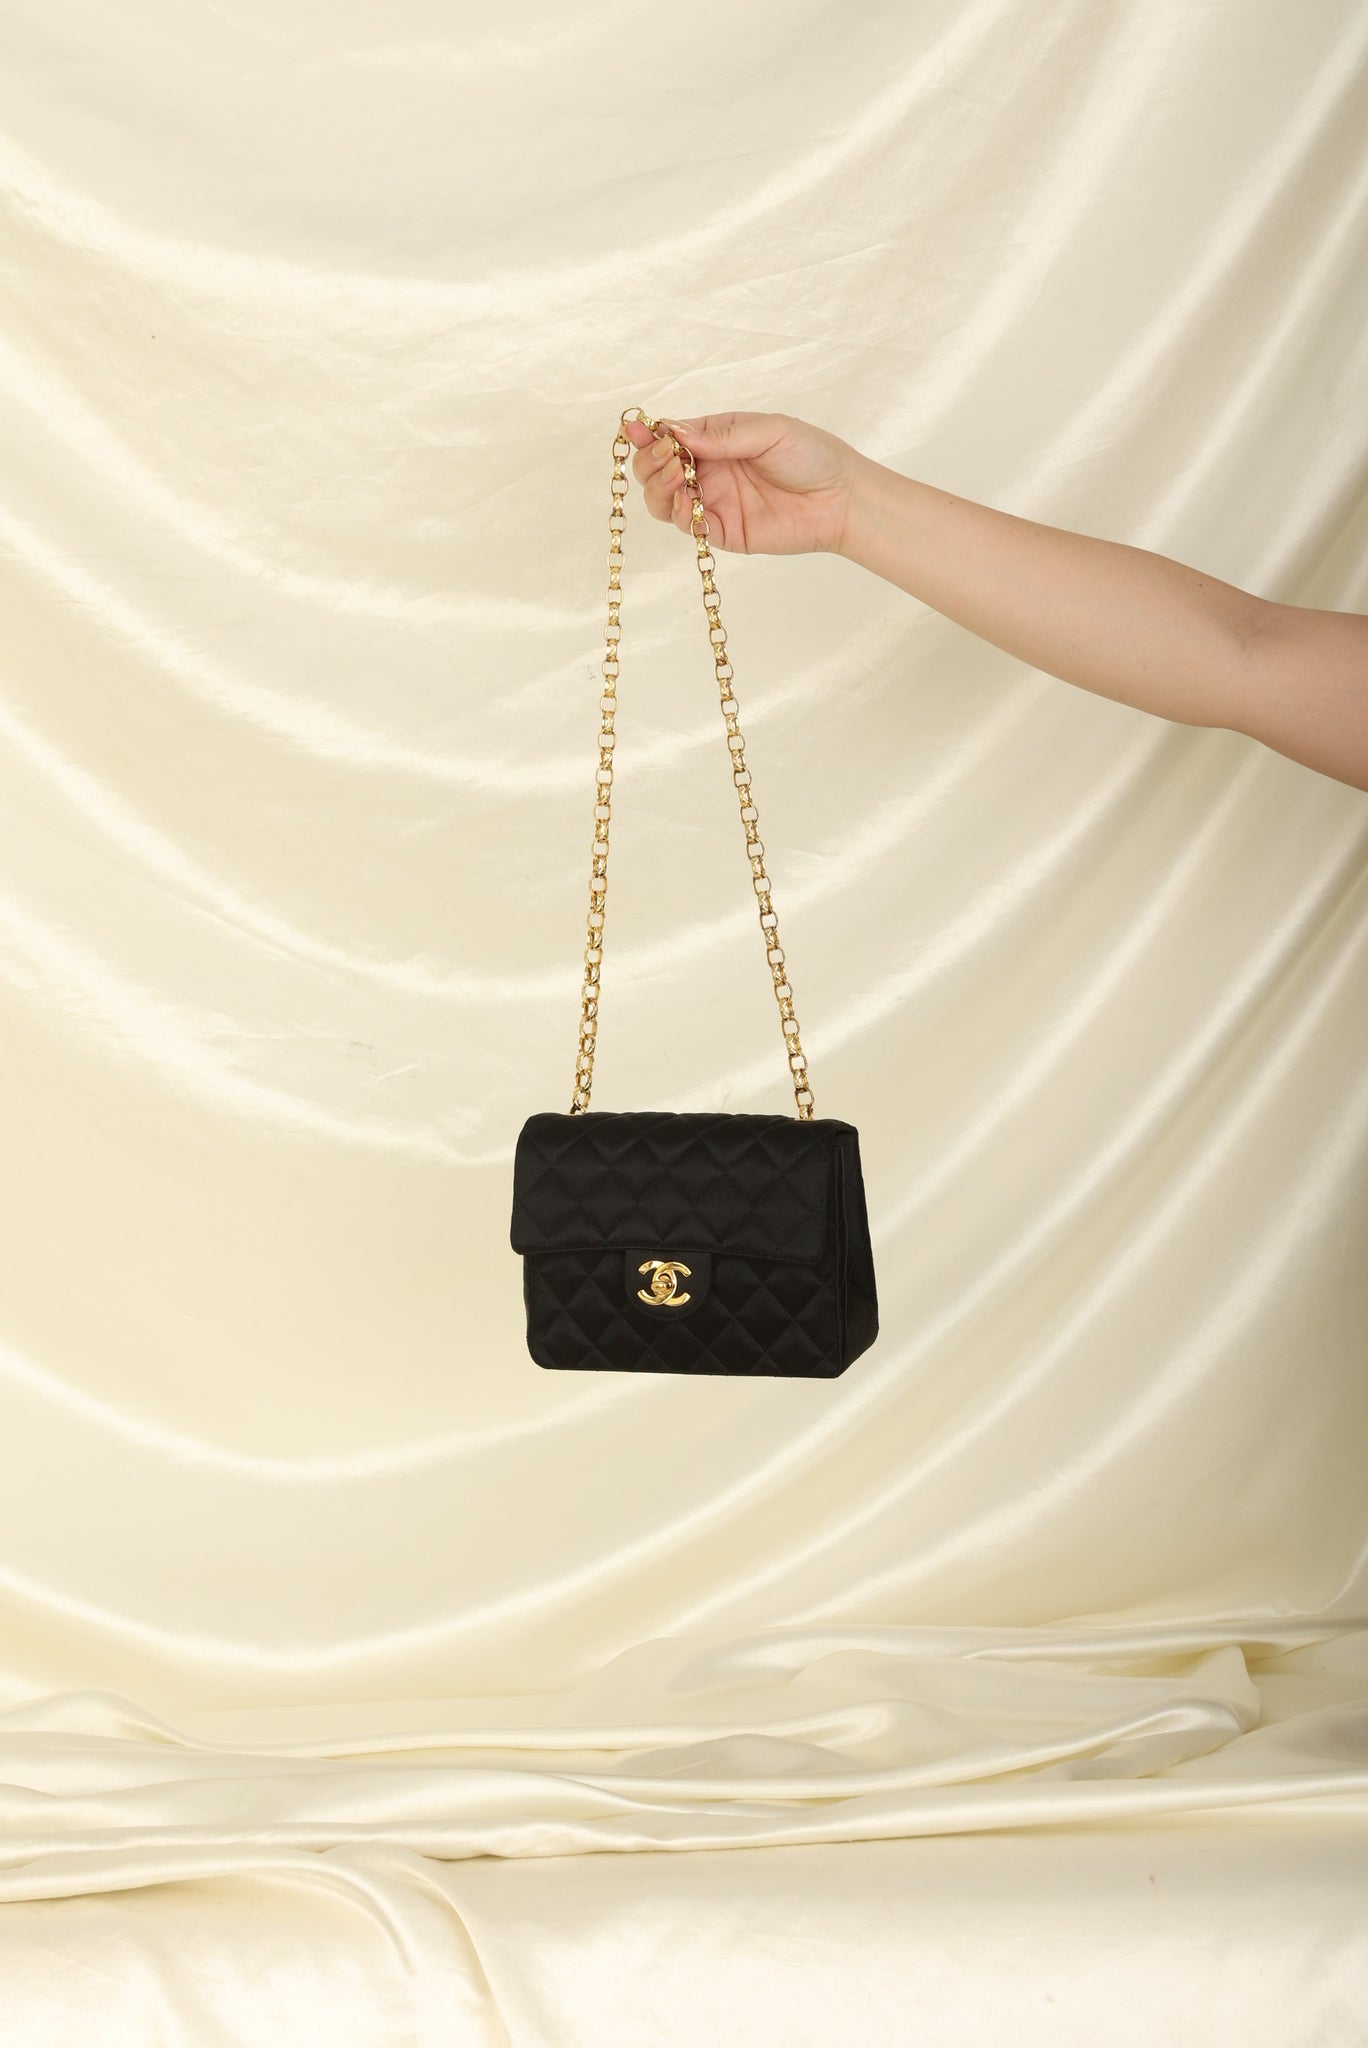 CHANEL classic JERSEY mini square BAG REVIEW 